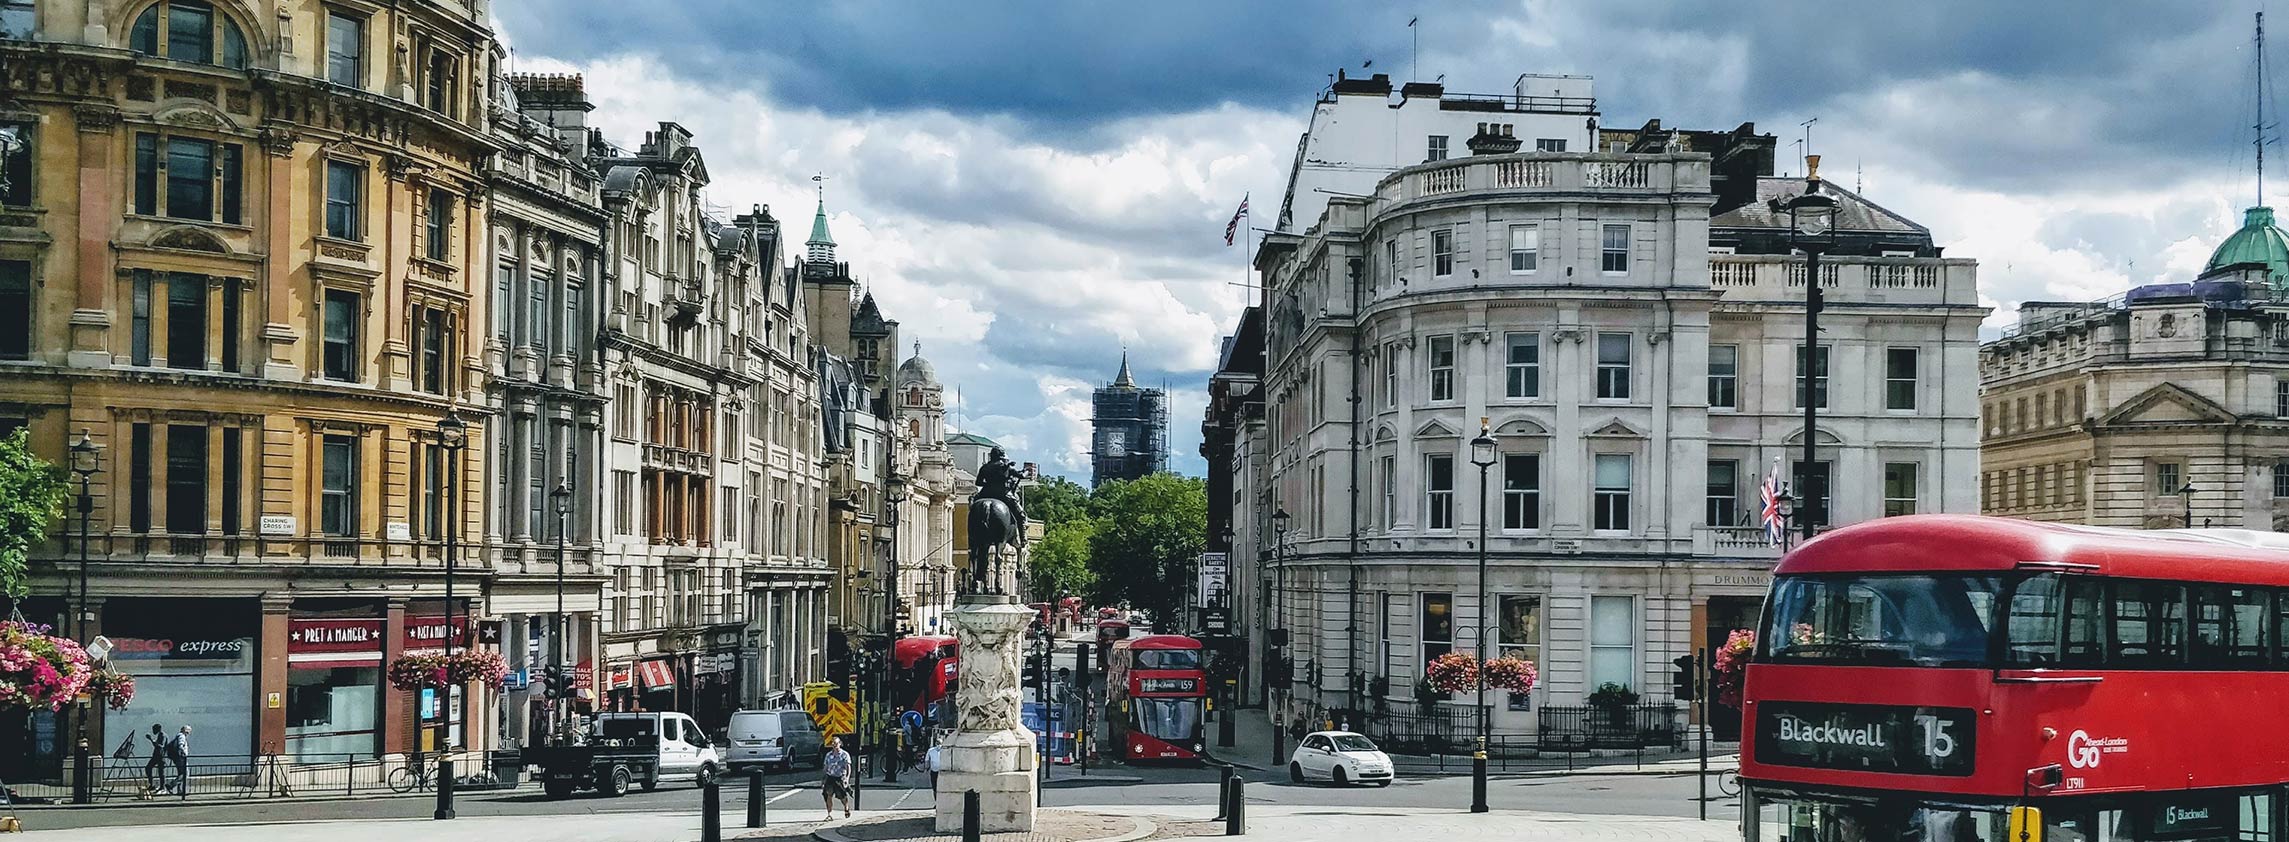 Office real estate demand in London surges in Q3